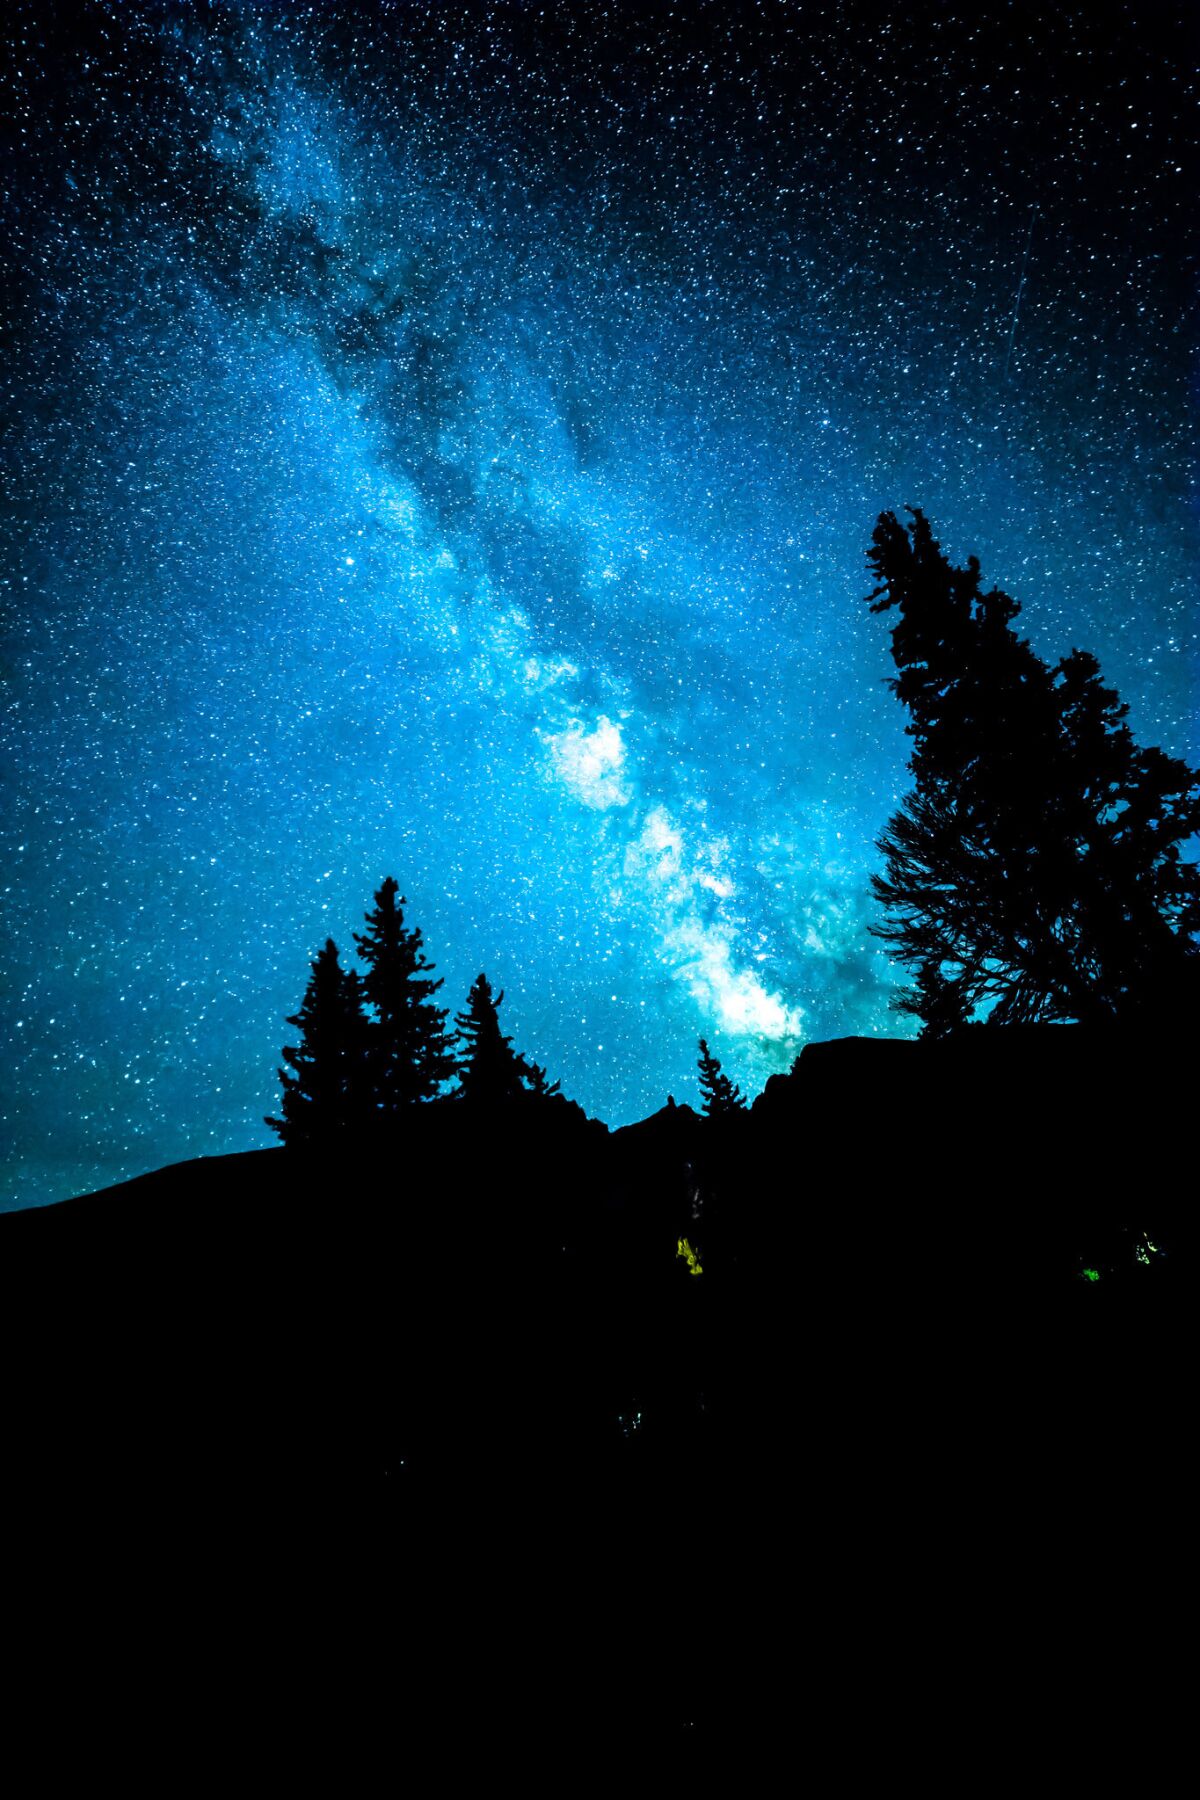 The Milky Way over Great Basin National Park. (Getty Images/iStockphoto)